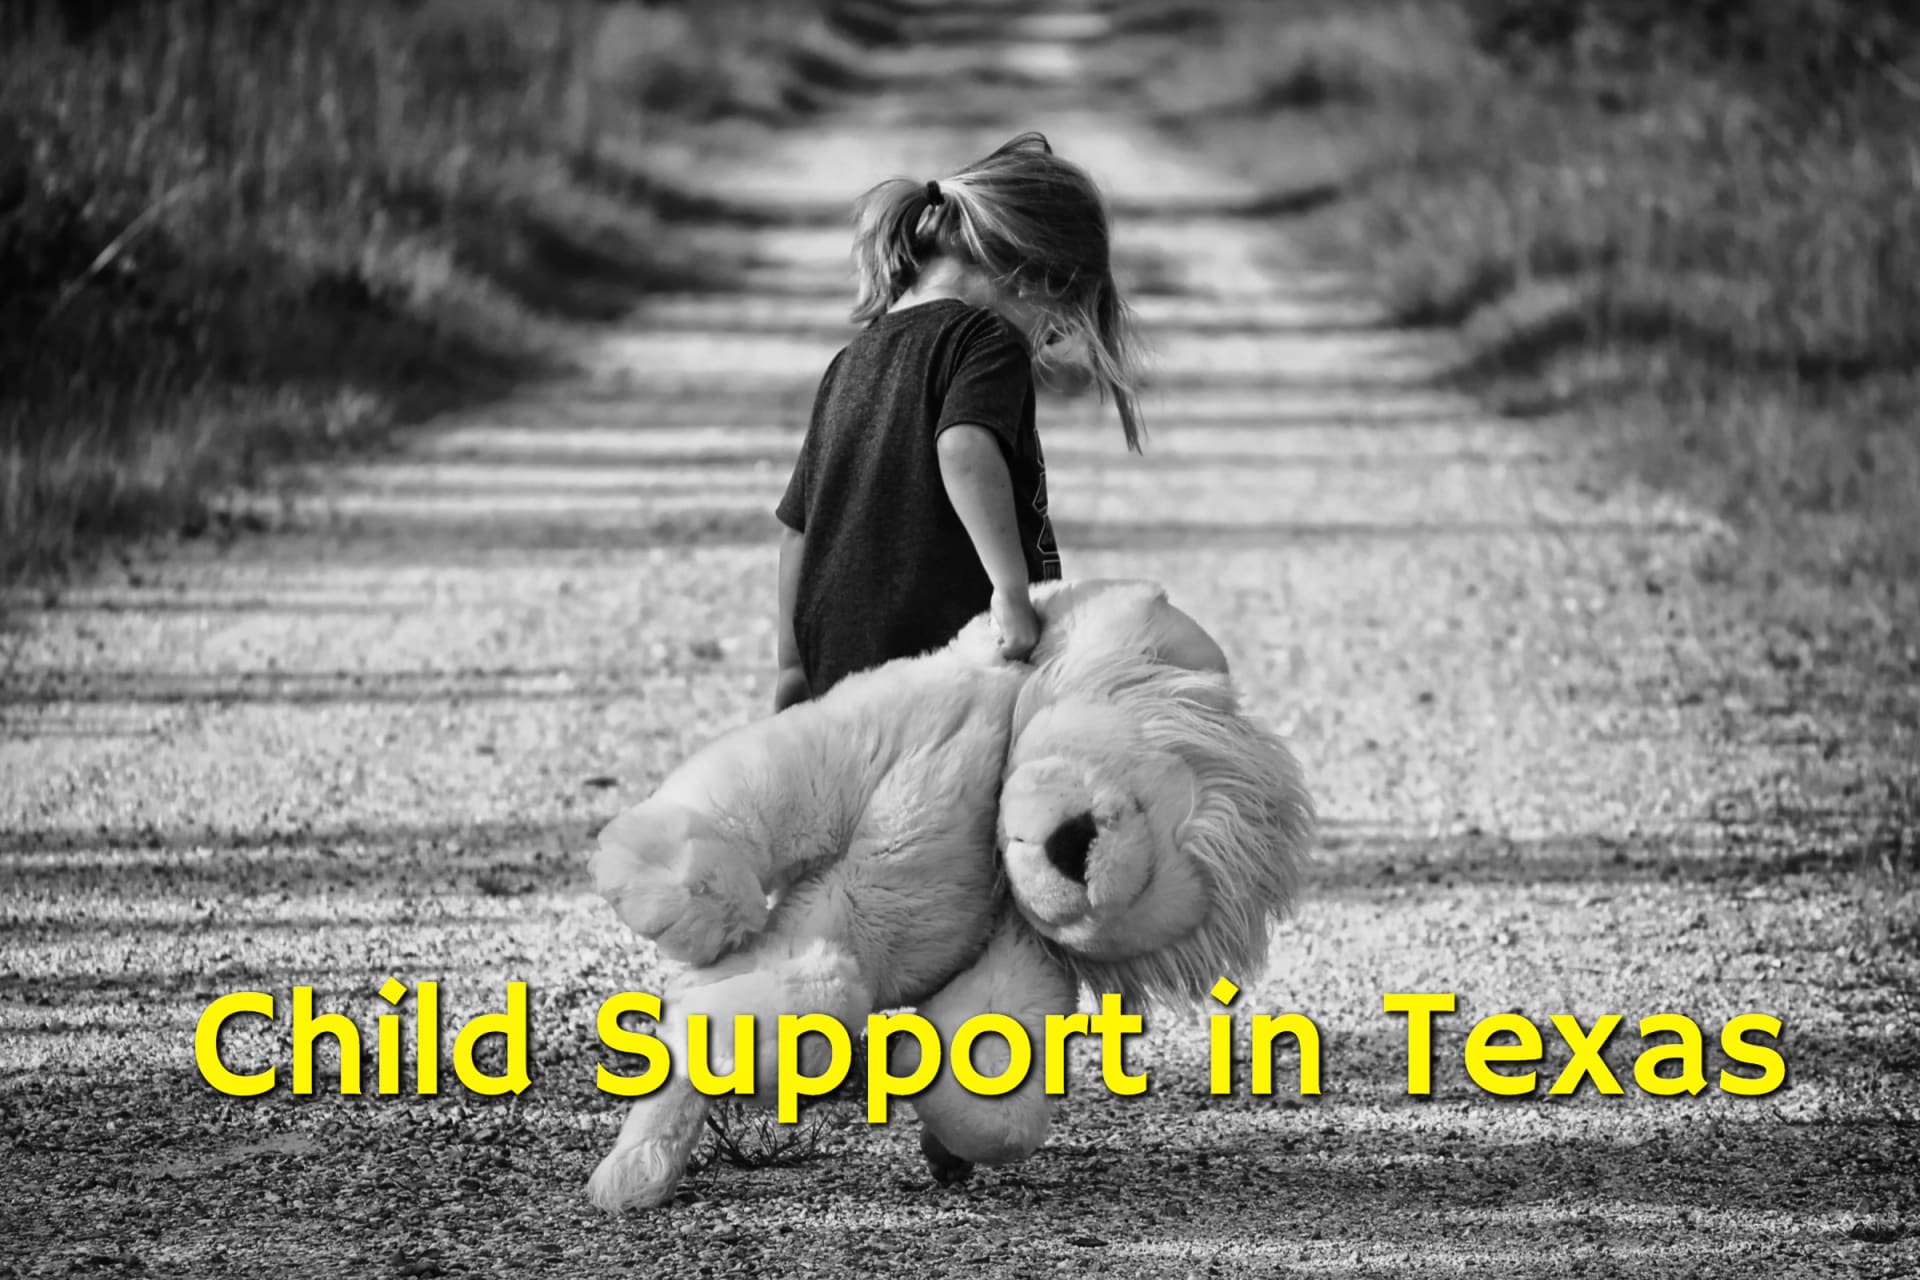 A child on a dirt road while parents battle over child support in Texas